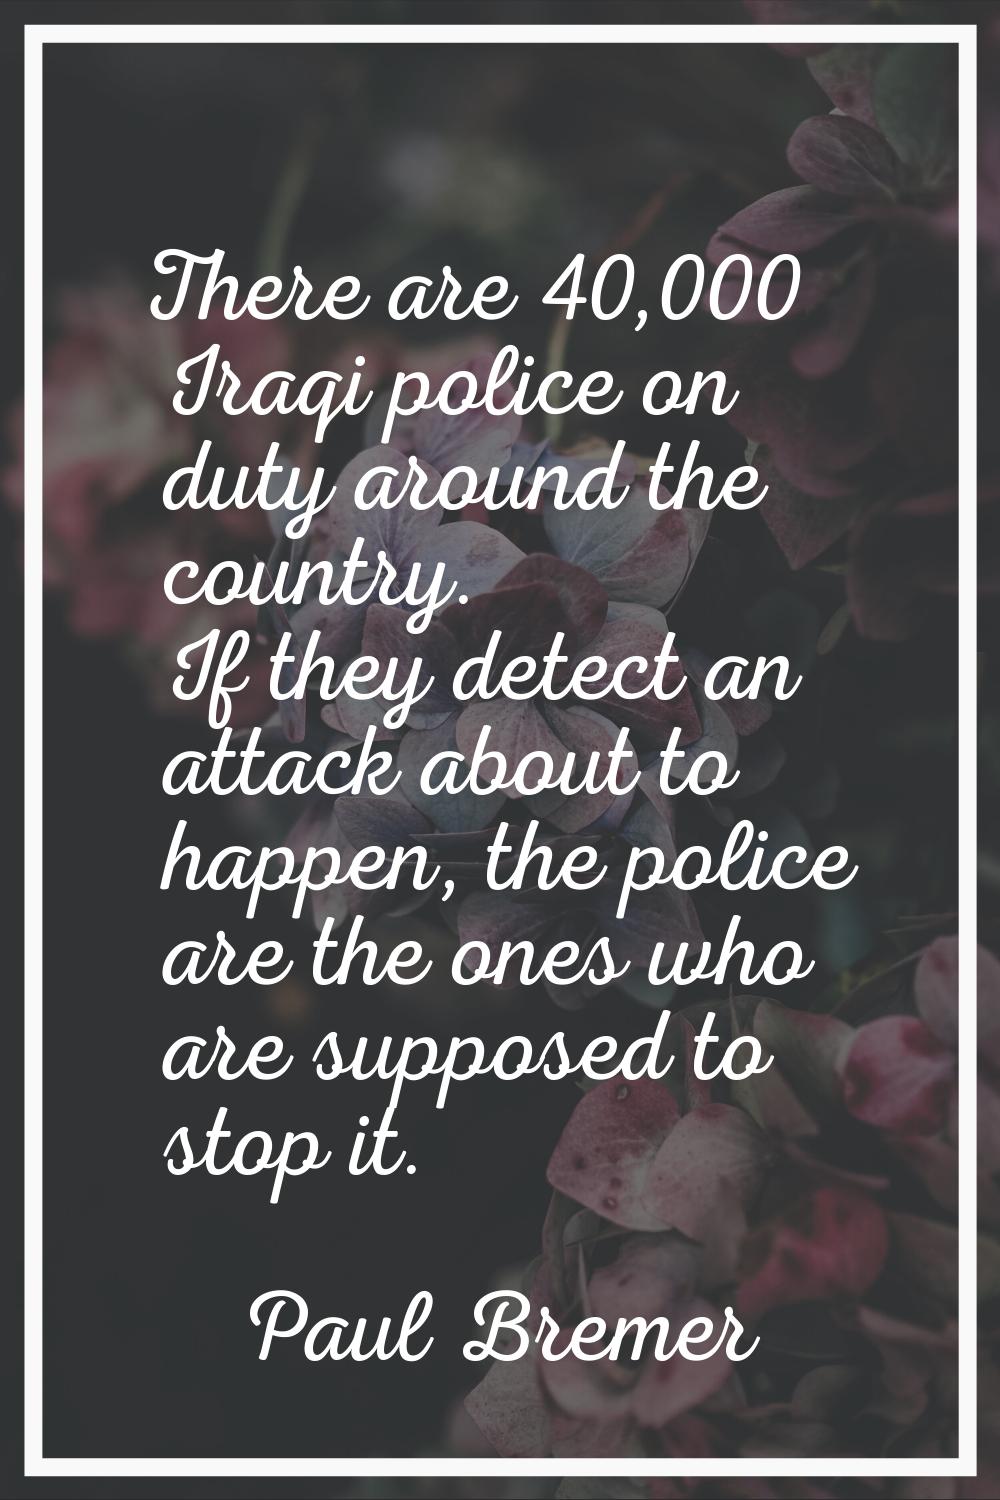 There are 40,000 Iraqi police on duty around the country. If they detect an attack about to happen,